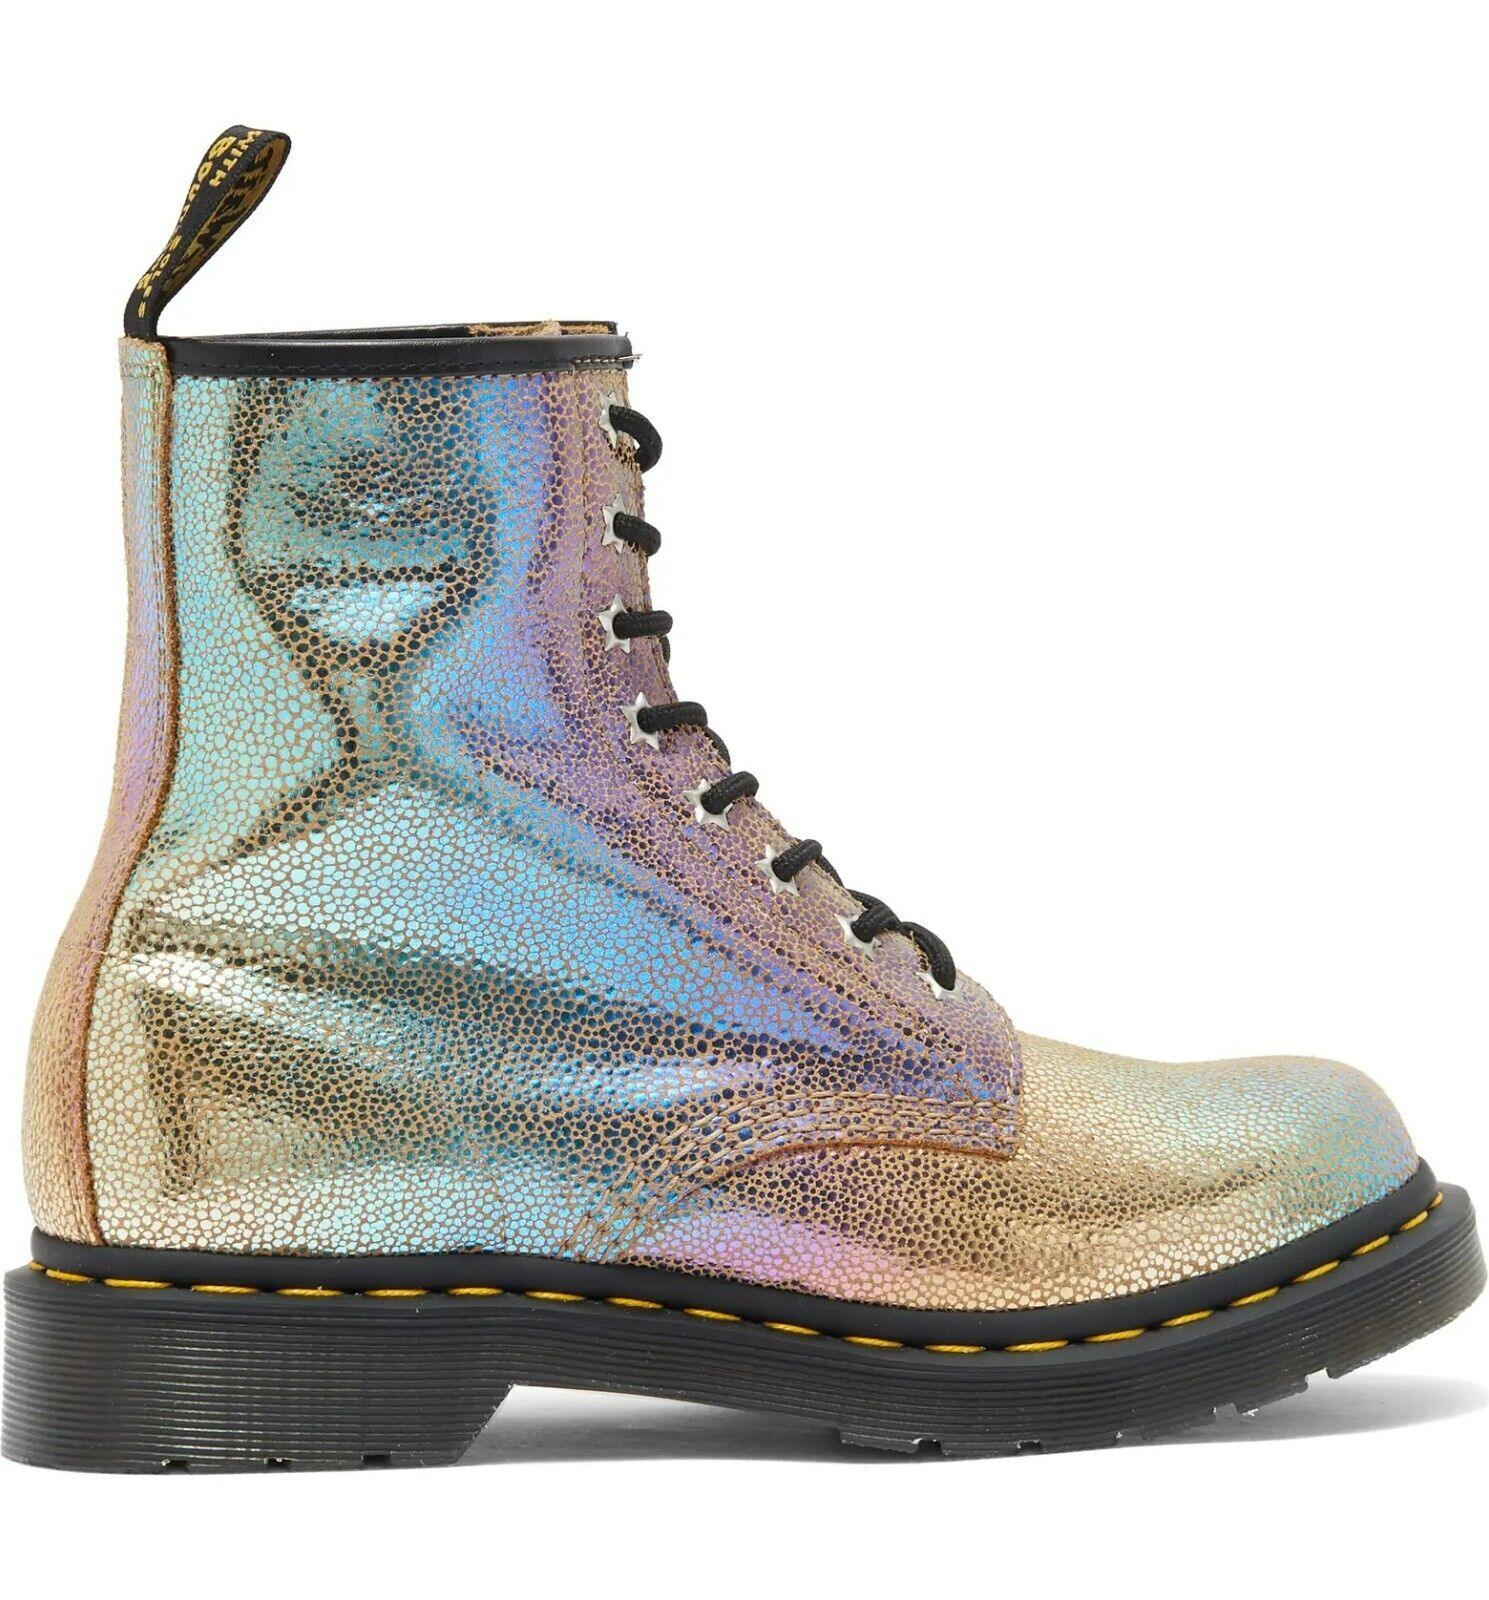 Dr. Martens 1460 Rainbow Ray Leather Lace Up Combat Boots Size US 8 EU 39 - SVNYFancy